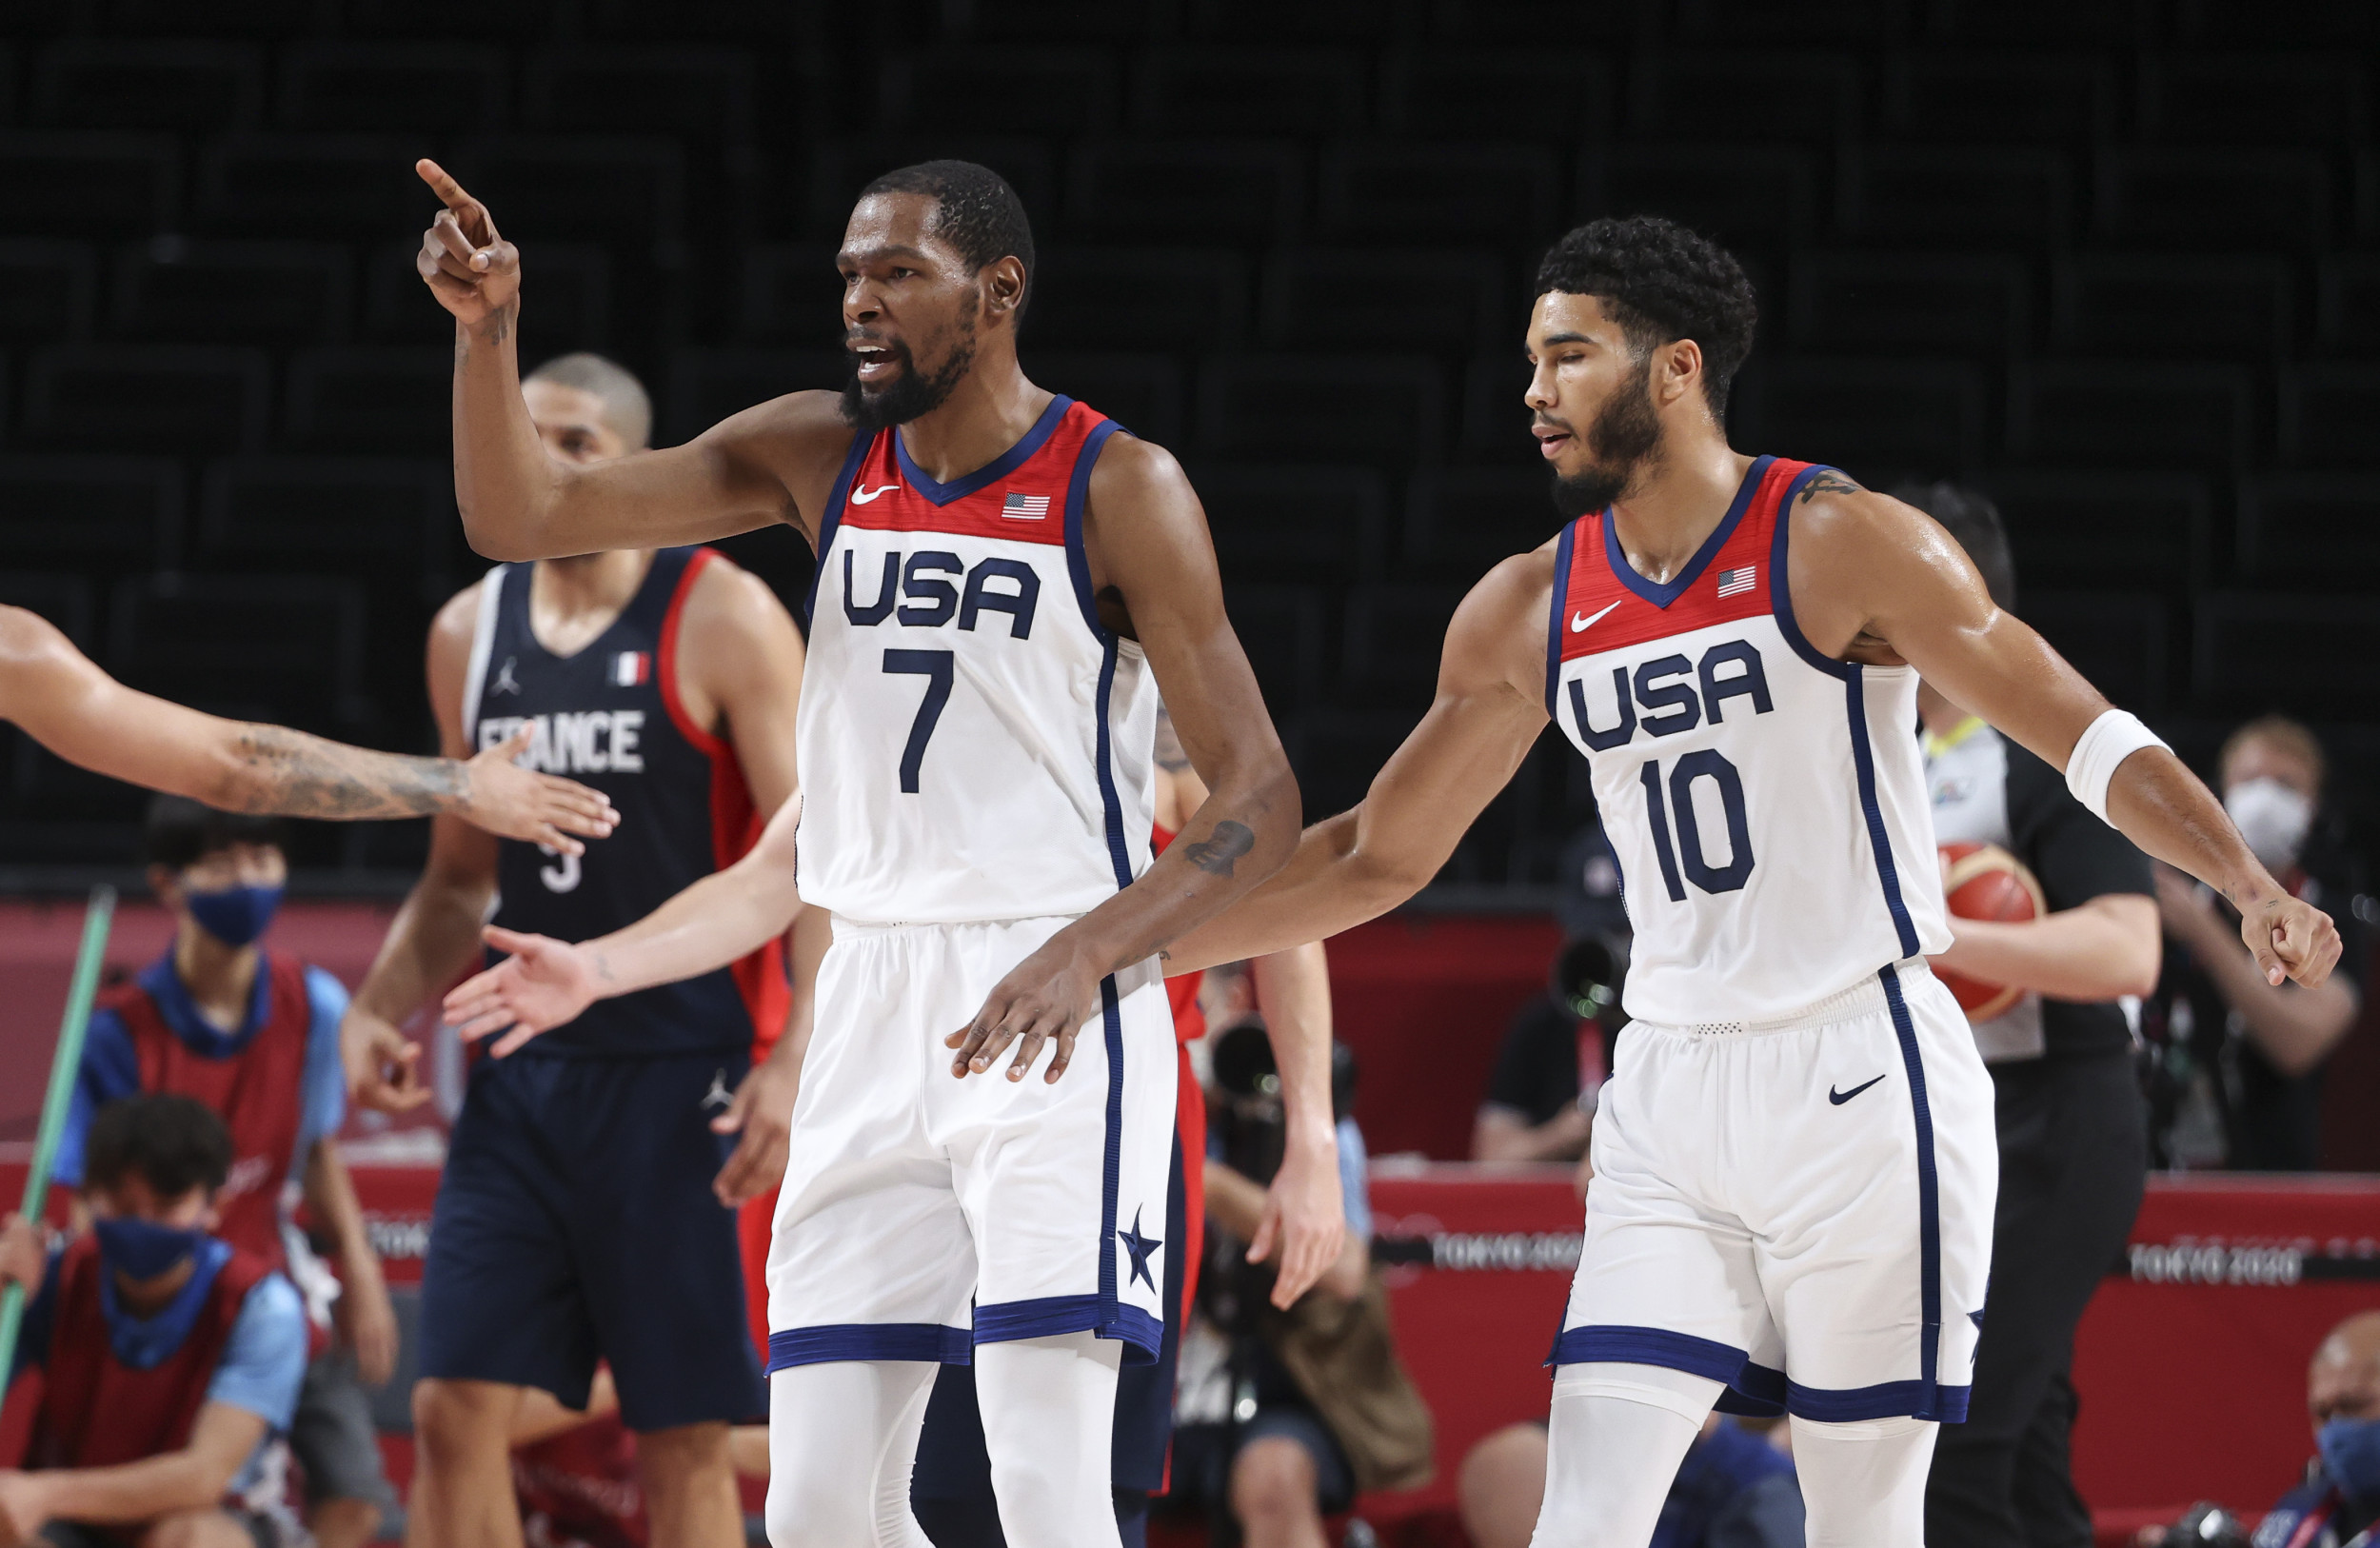 usa basketball finalizes 2024 paris olympics roster headlined by lebron james, steph curry